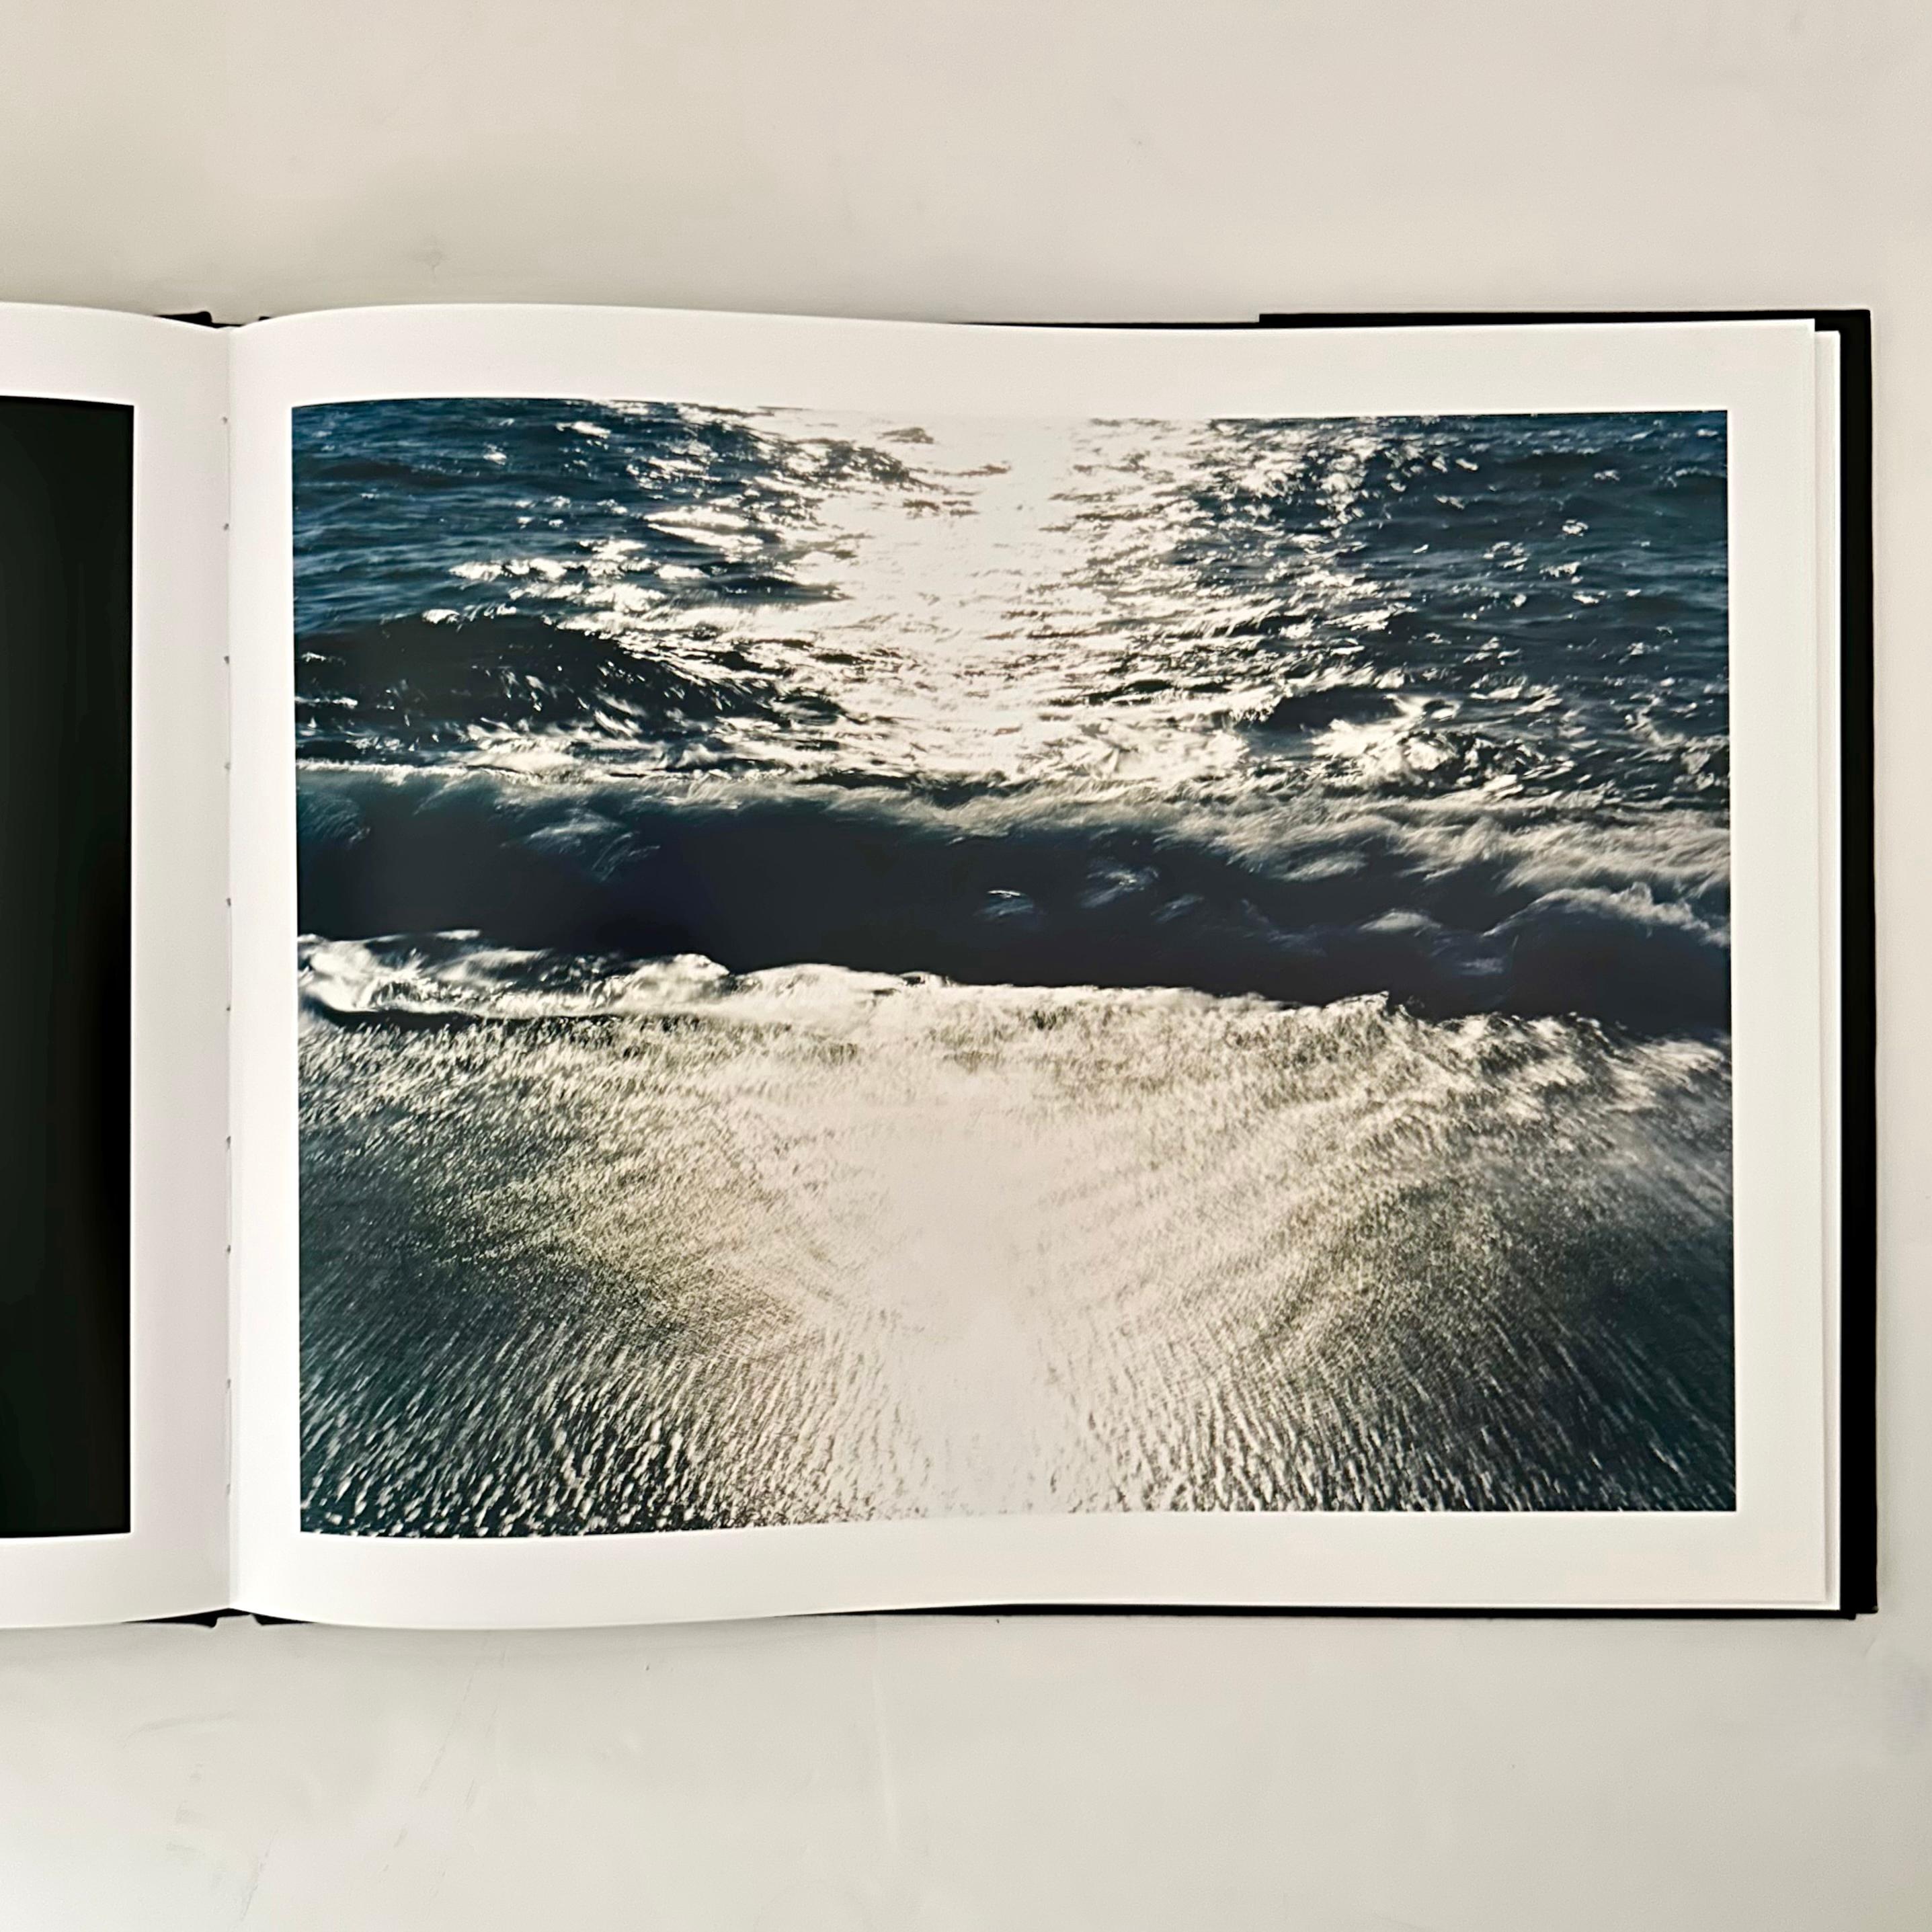 Published by Nazraelli Press LLC., 1st edition, limited edition of 1000,  2007. Hardback with English text.

The artist’s first monograph, this series of photographs explores the relationship between the moon and the ocean.  

Large format, 25